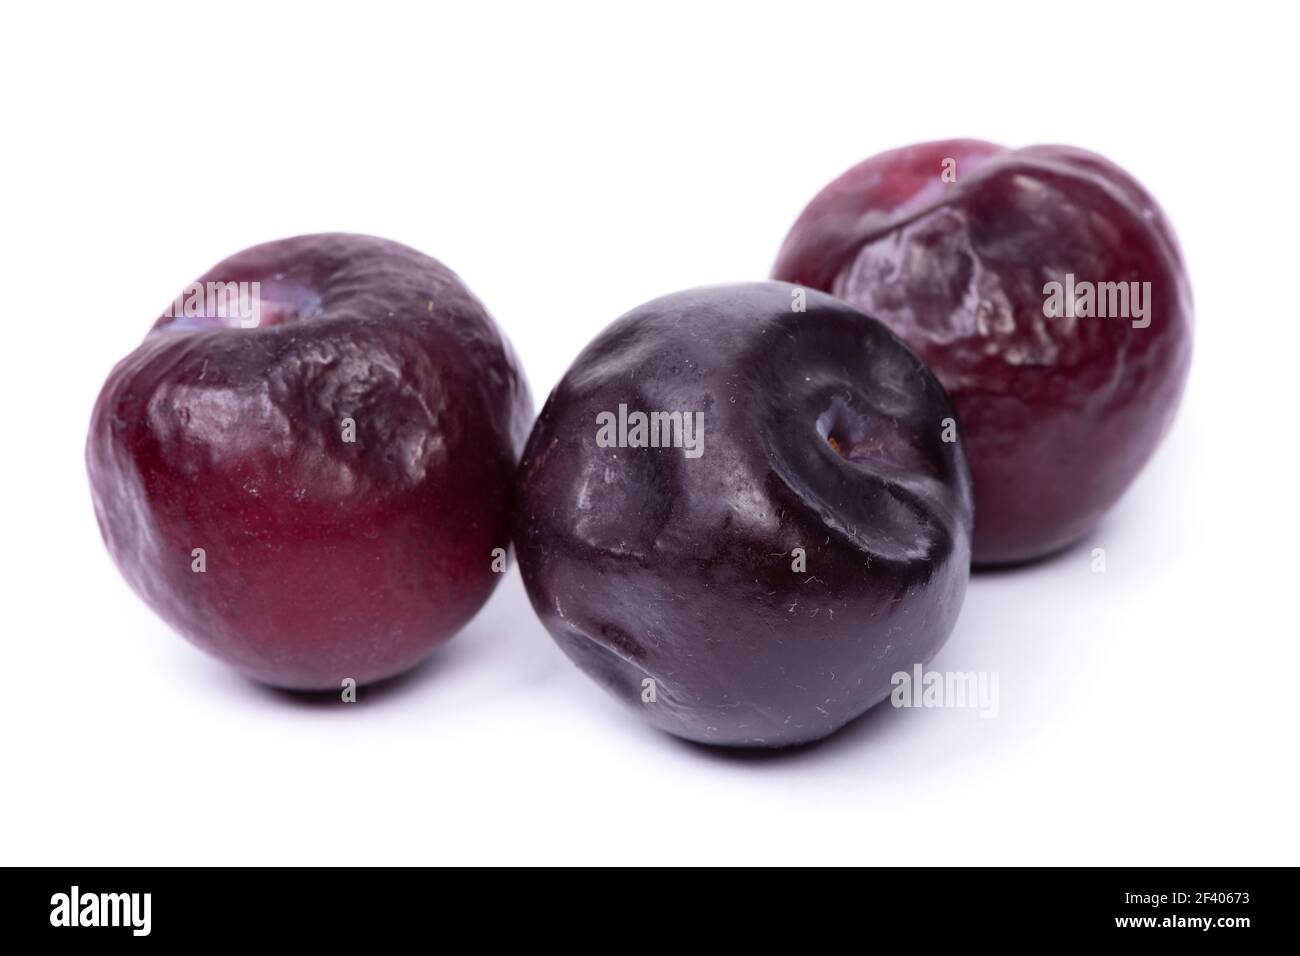 Group of overreipe plums isolated on white background Stock Photo